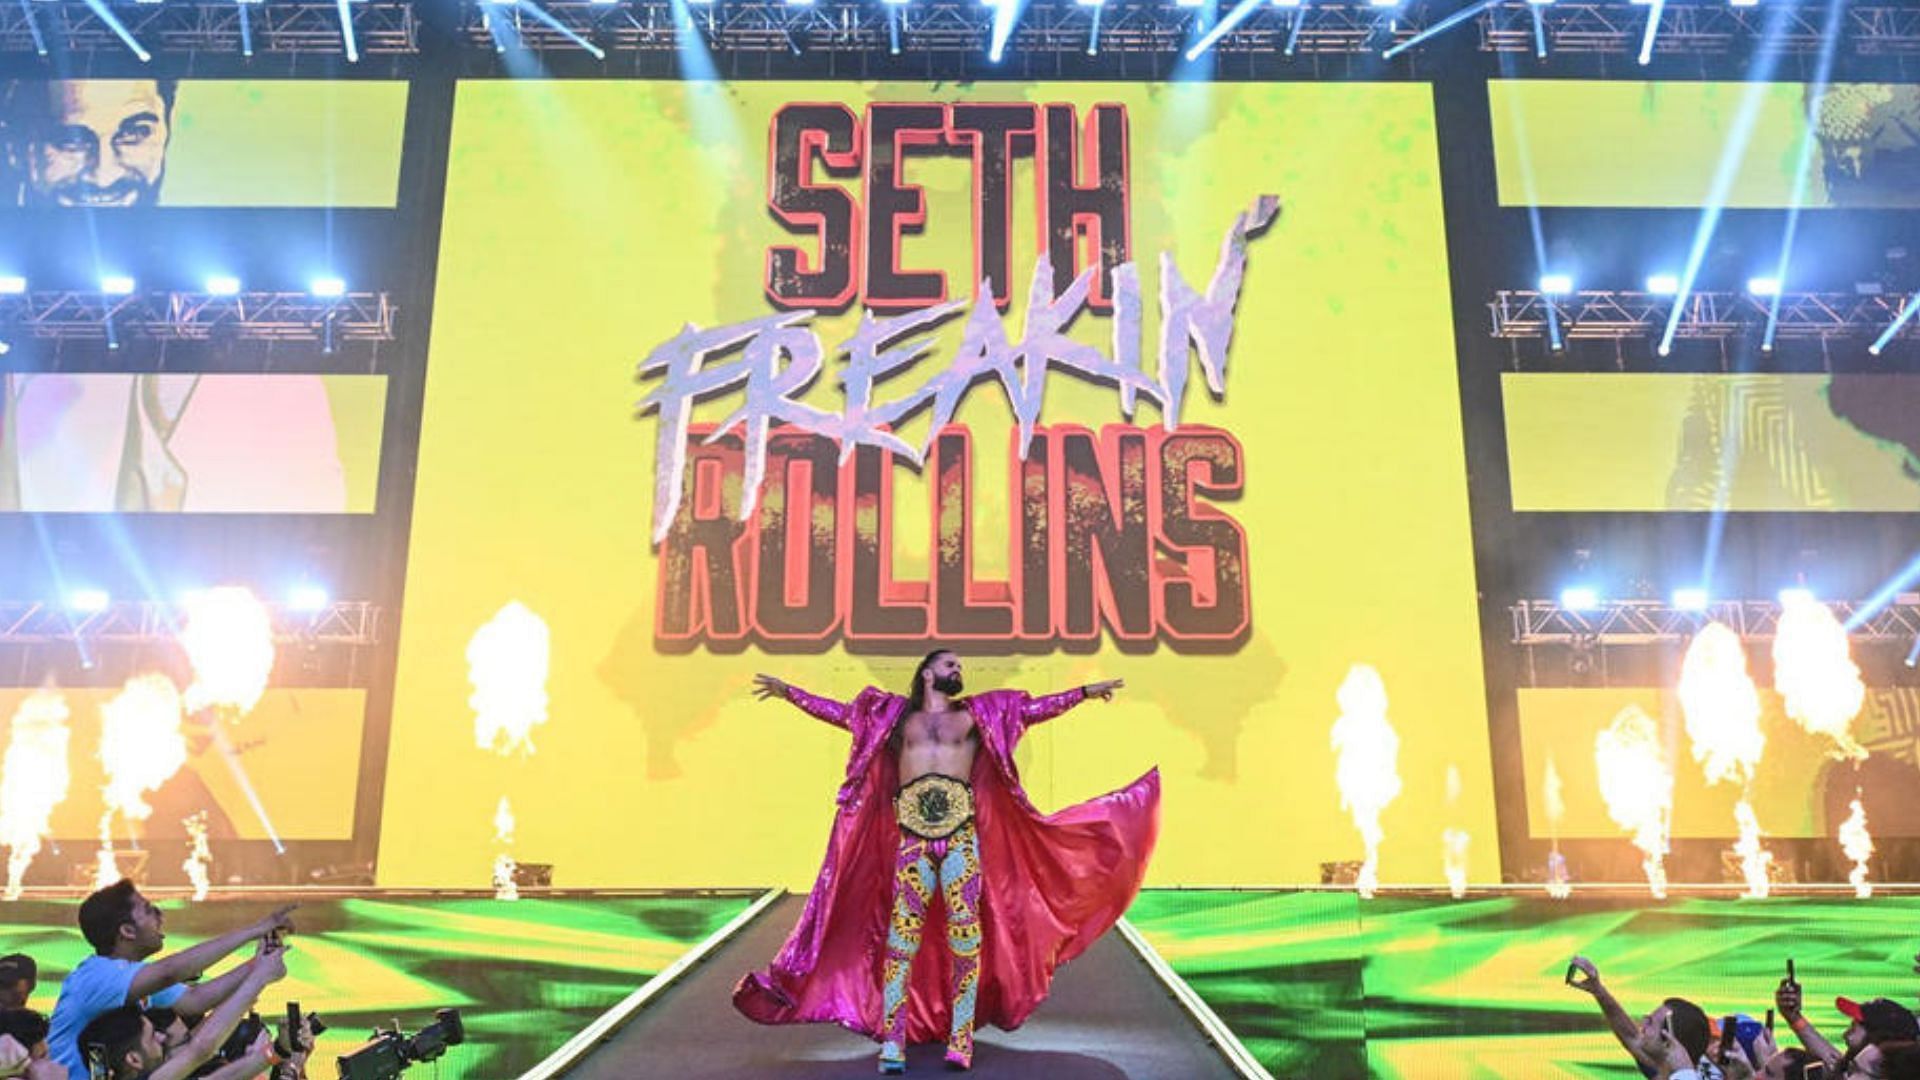 Seth Rollins is the current WWE World Heavyweight Champion [Photo courtesy of WWE Official Website]